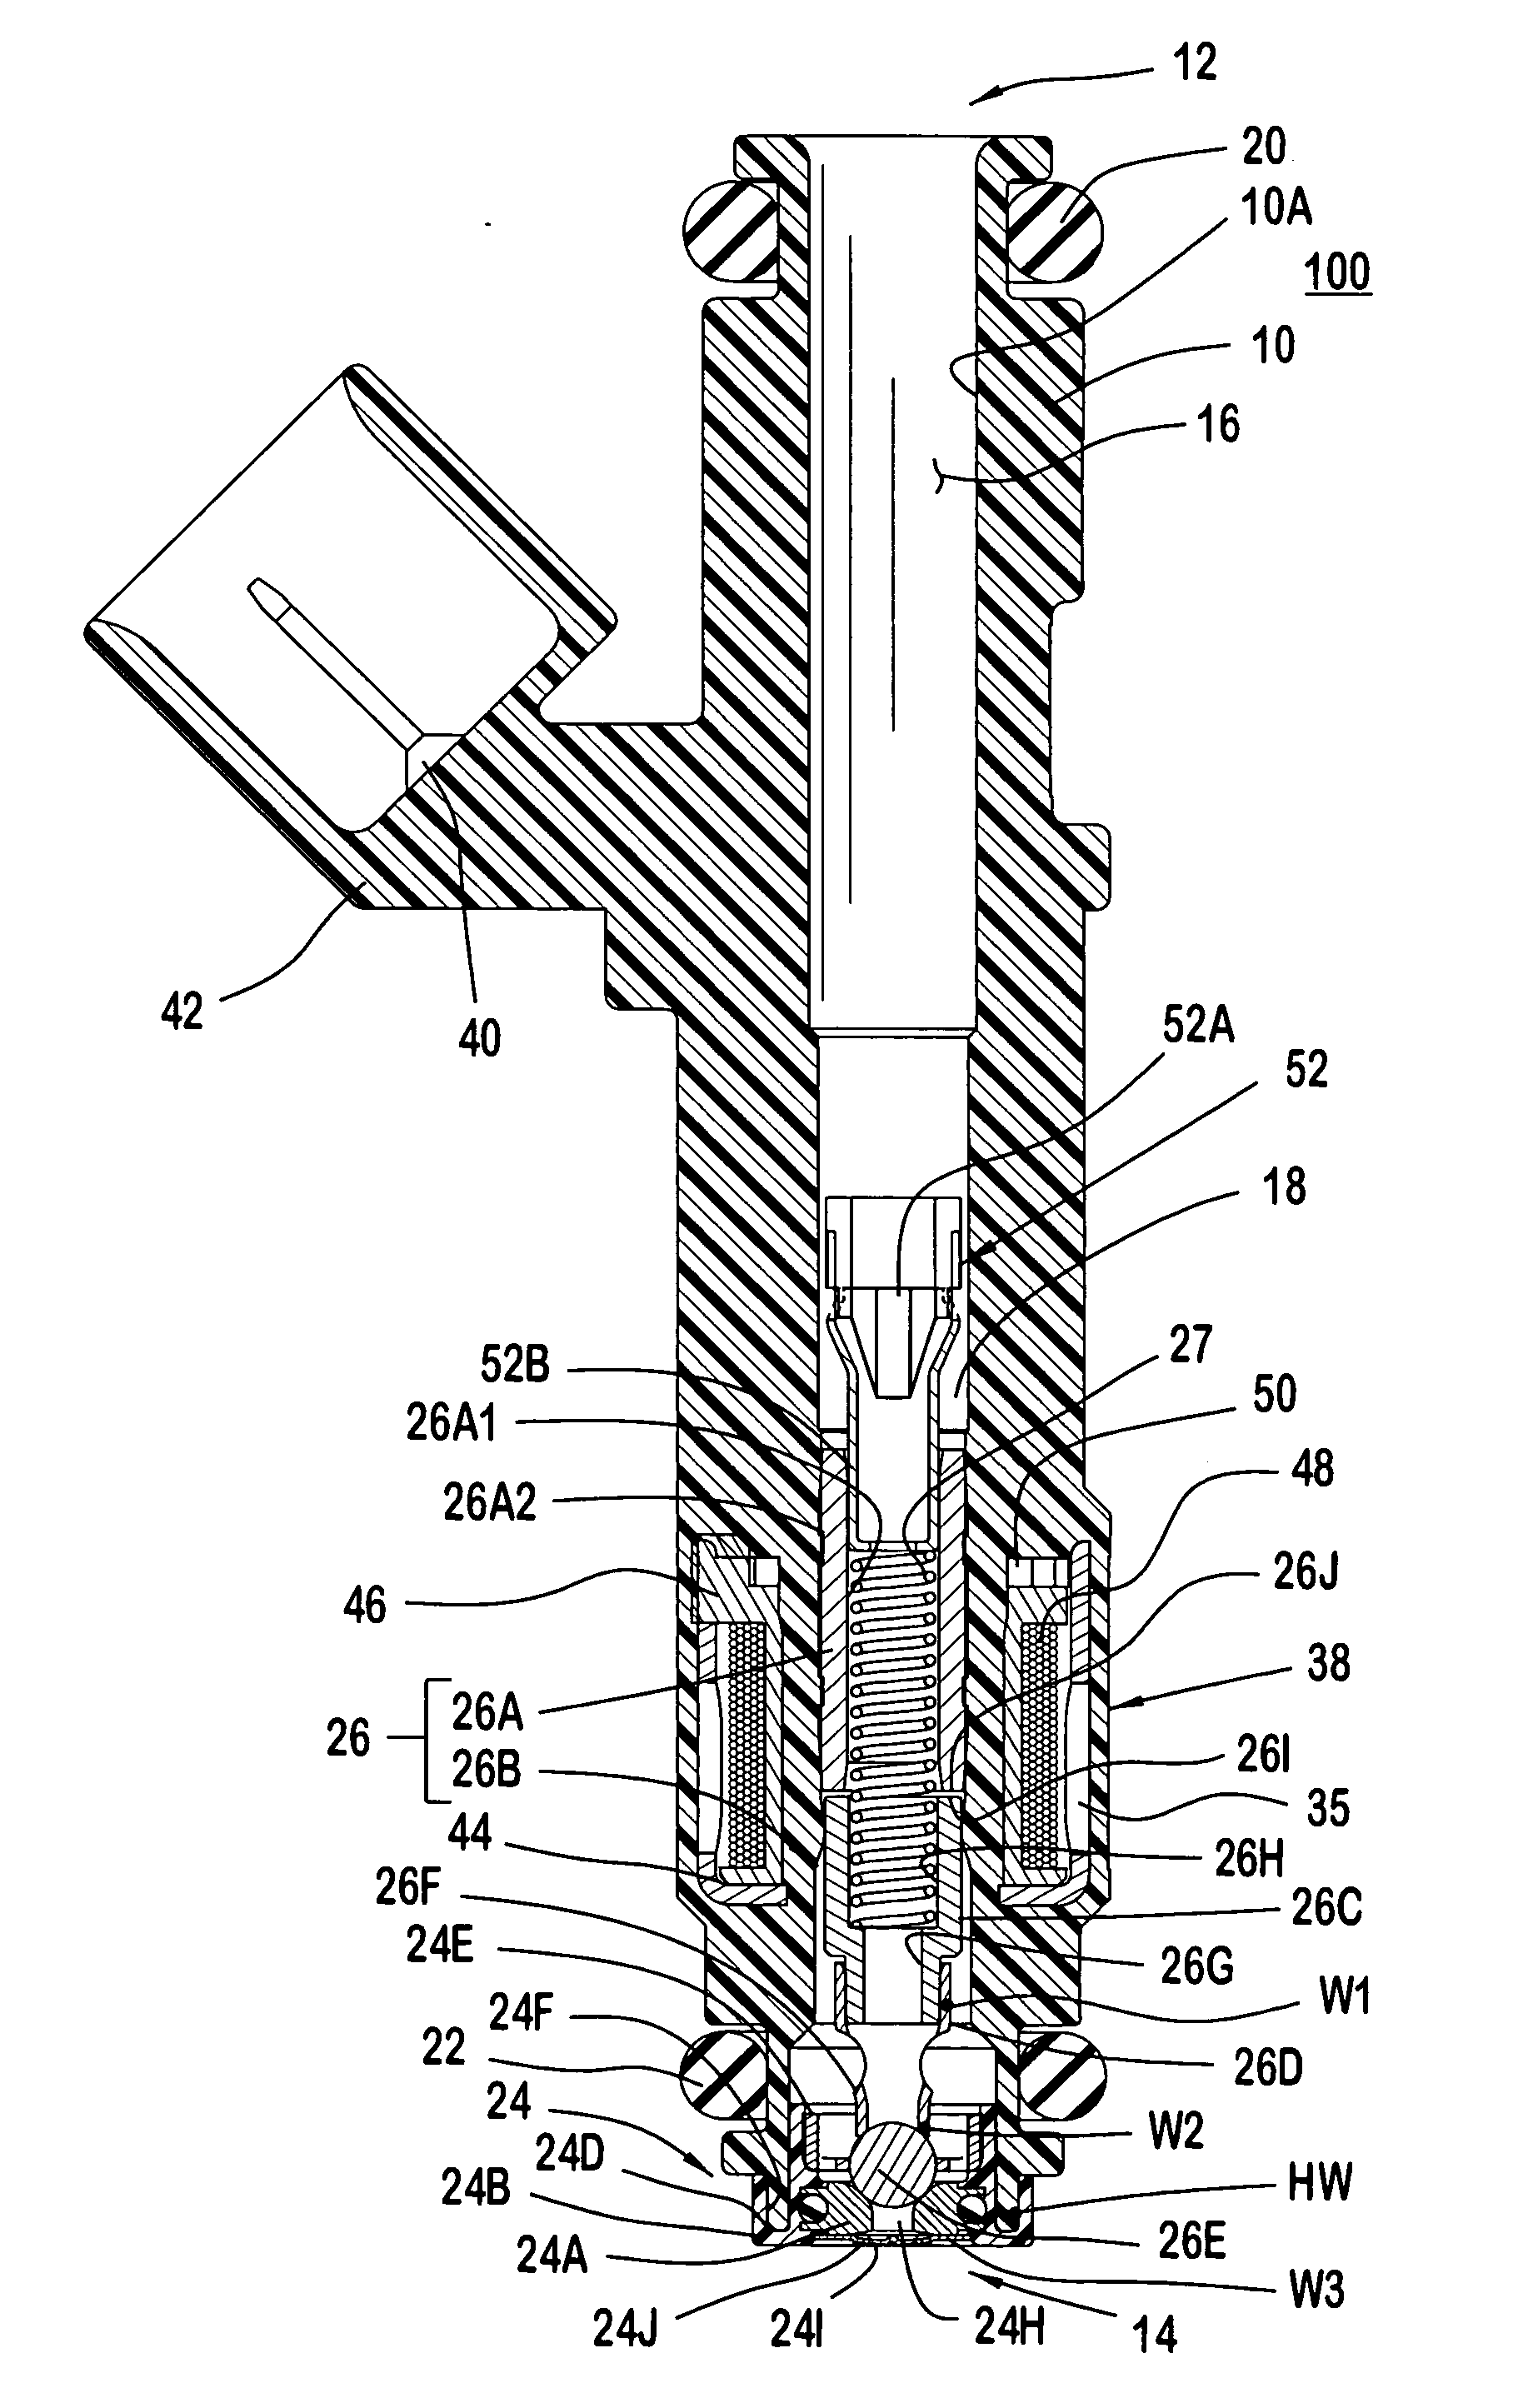 Fuel injector with a metering assembly having a seat molded to a polymeric support member